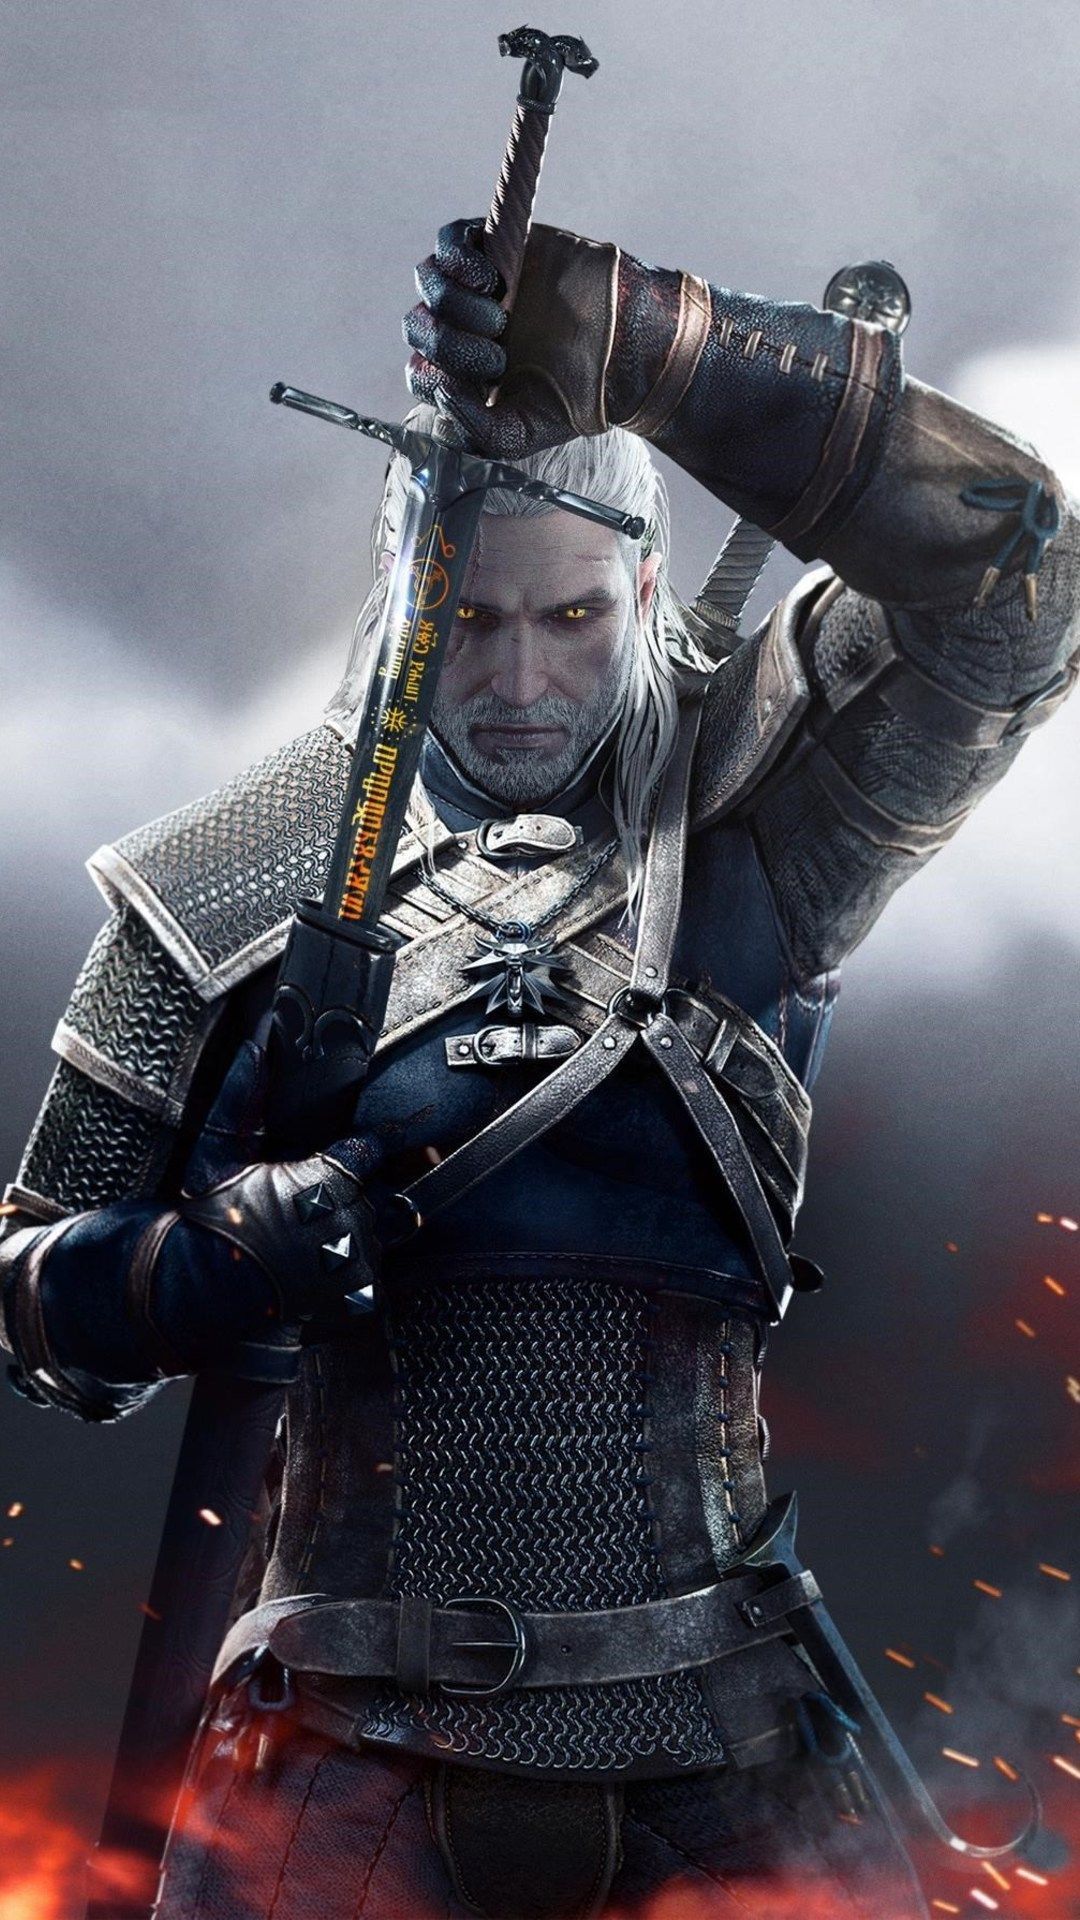 Witcher 3 iPhone Wallpaper Free Witcher 3 iPhone Background